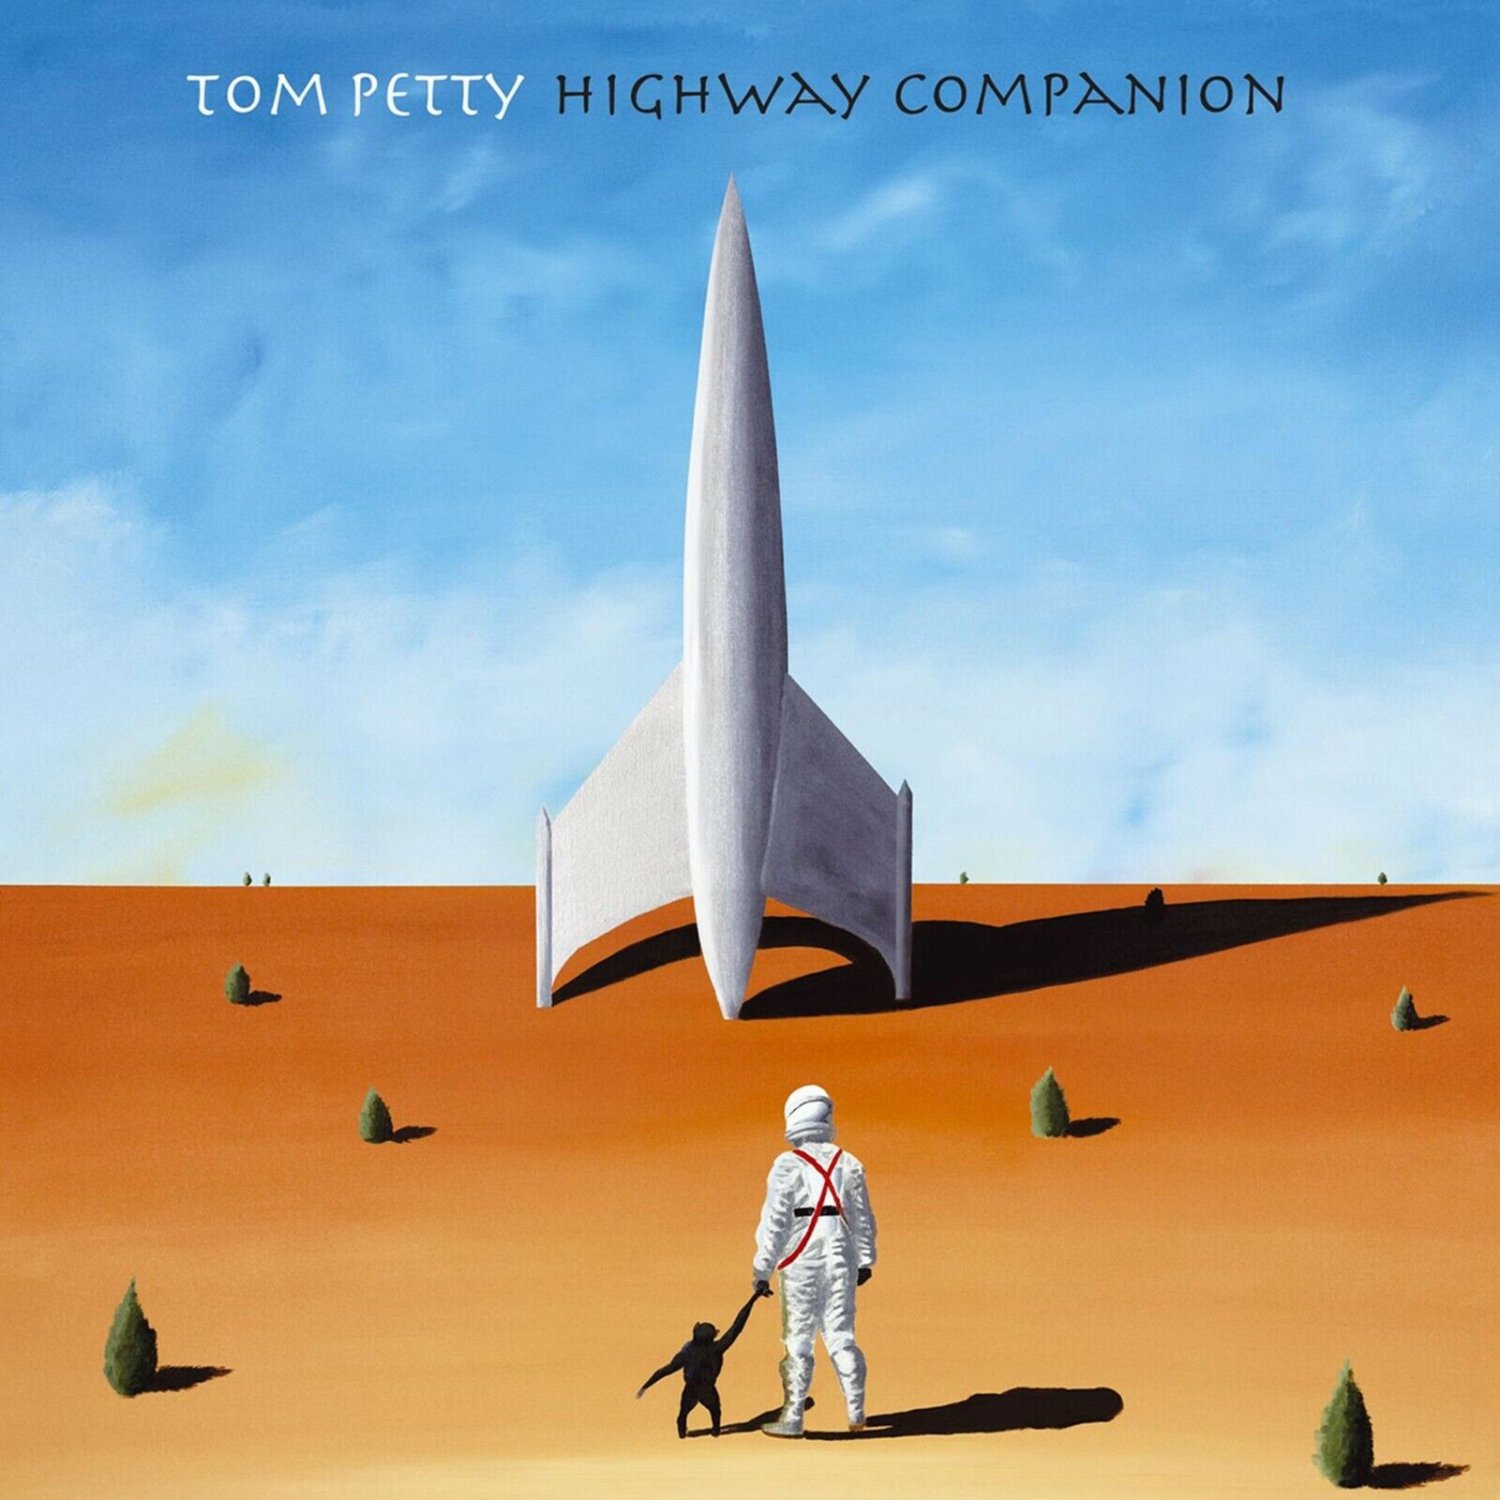 TOM PETTY Highway Companion BANNER 3x3 Ft Fabric Poster Tapestry Flag album art